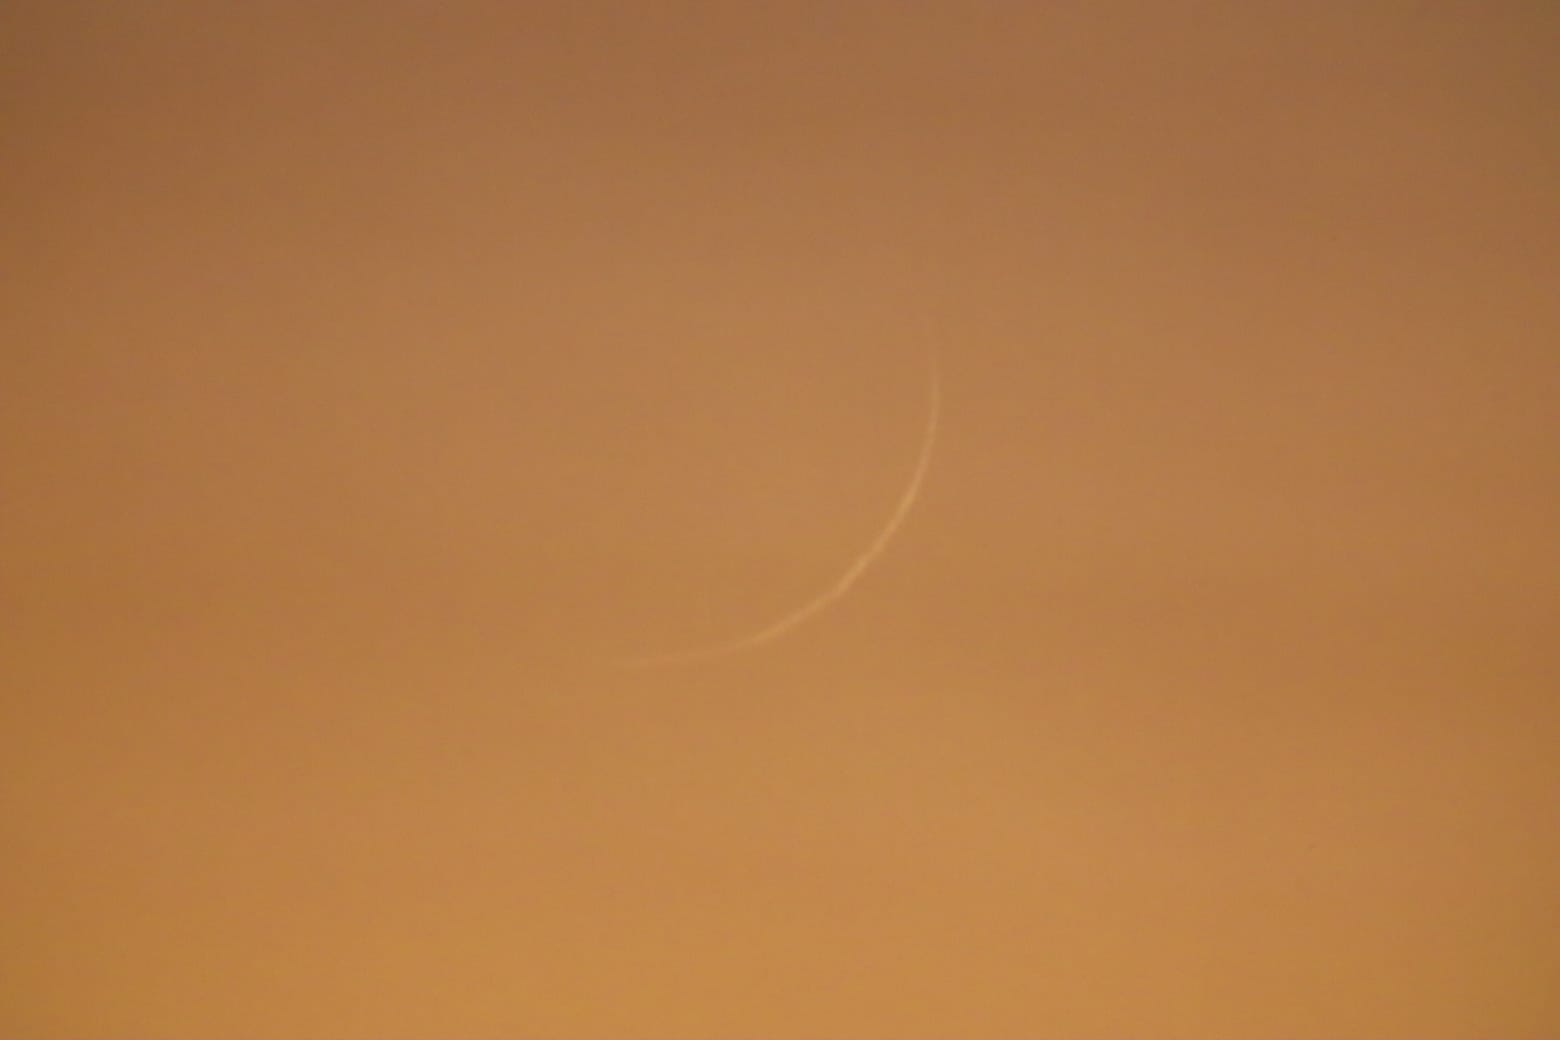 Crescent moon photo of 1 Rabi' al-Awwal 1444 AH from San Diego, California, USA on Monday evening, 26 Sep 2022 (Central Hilal Committee).